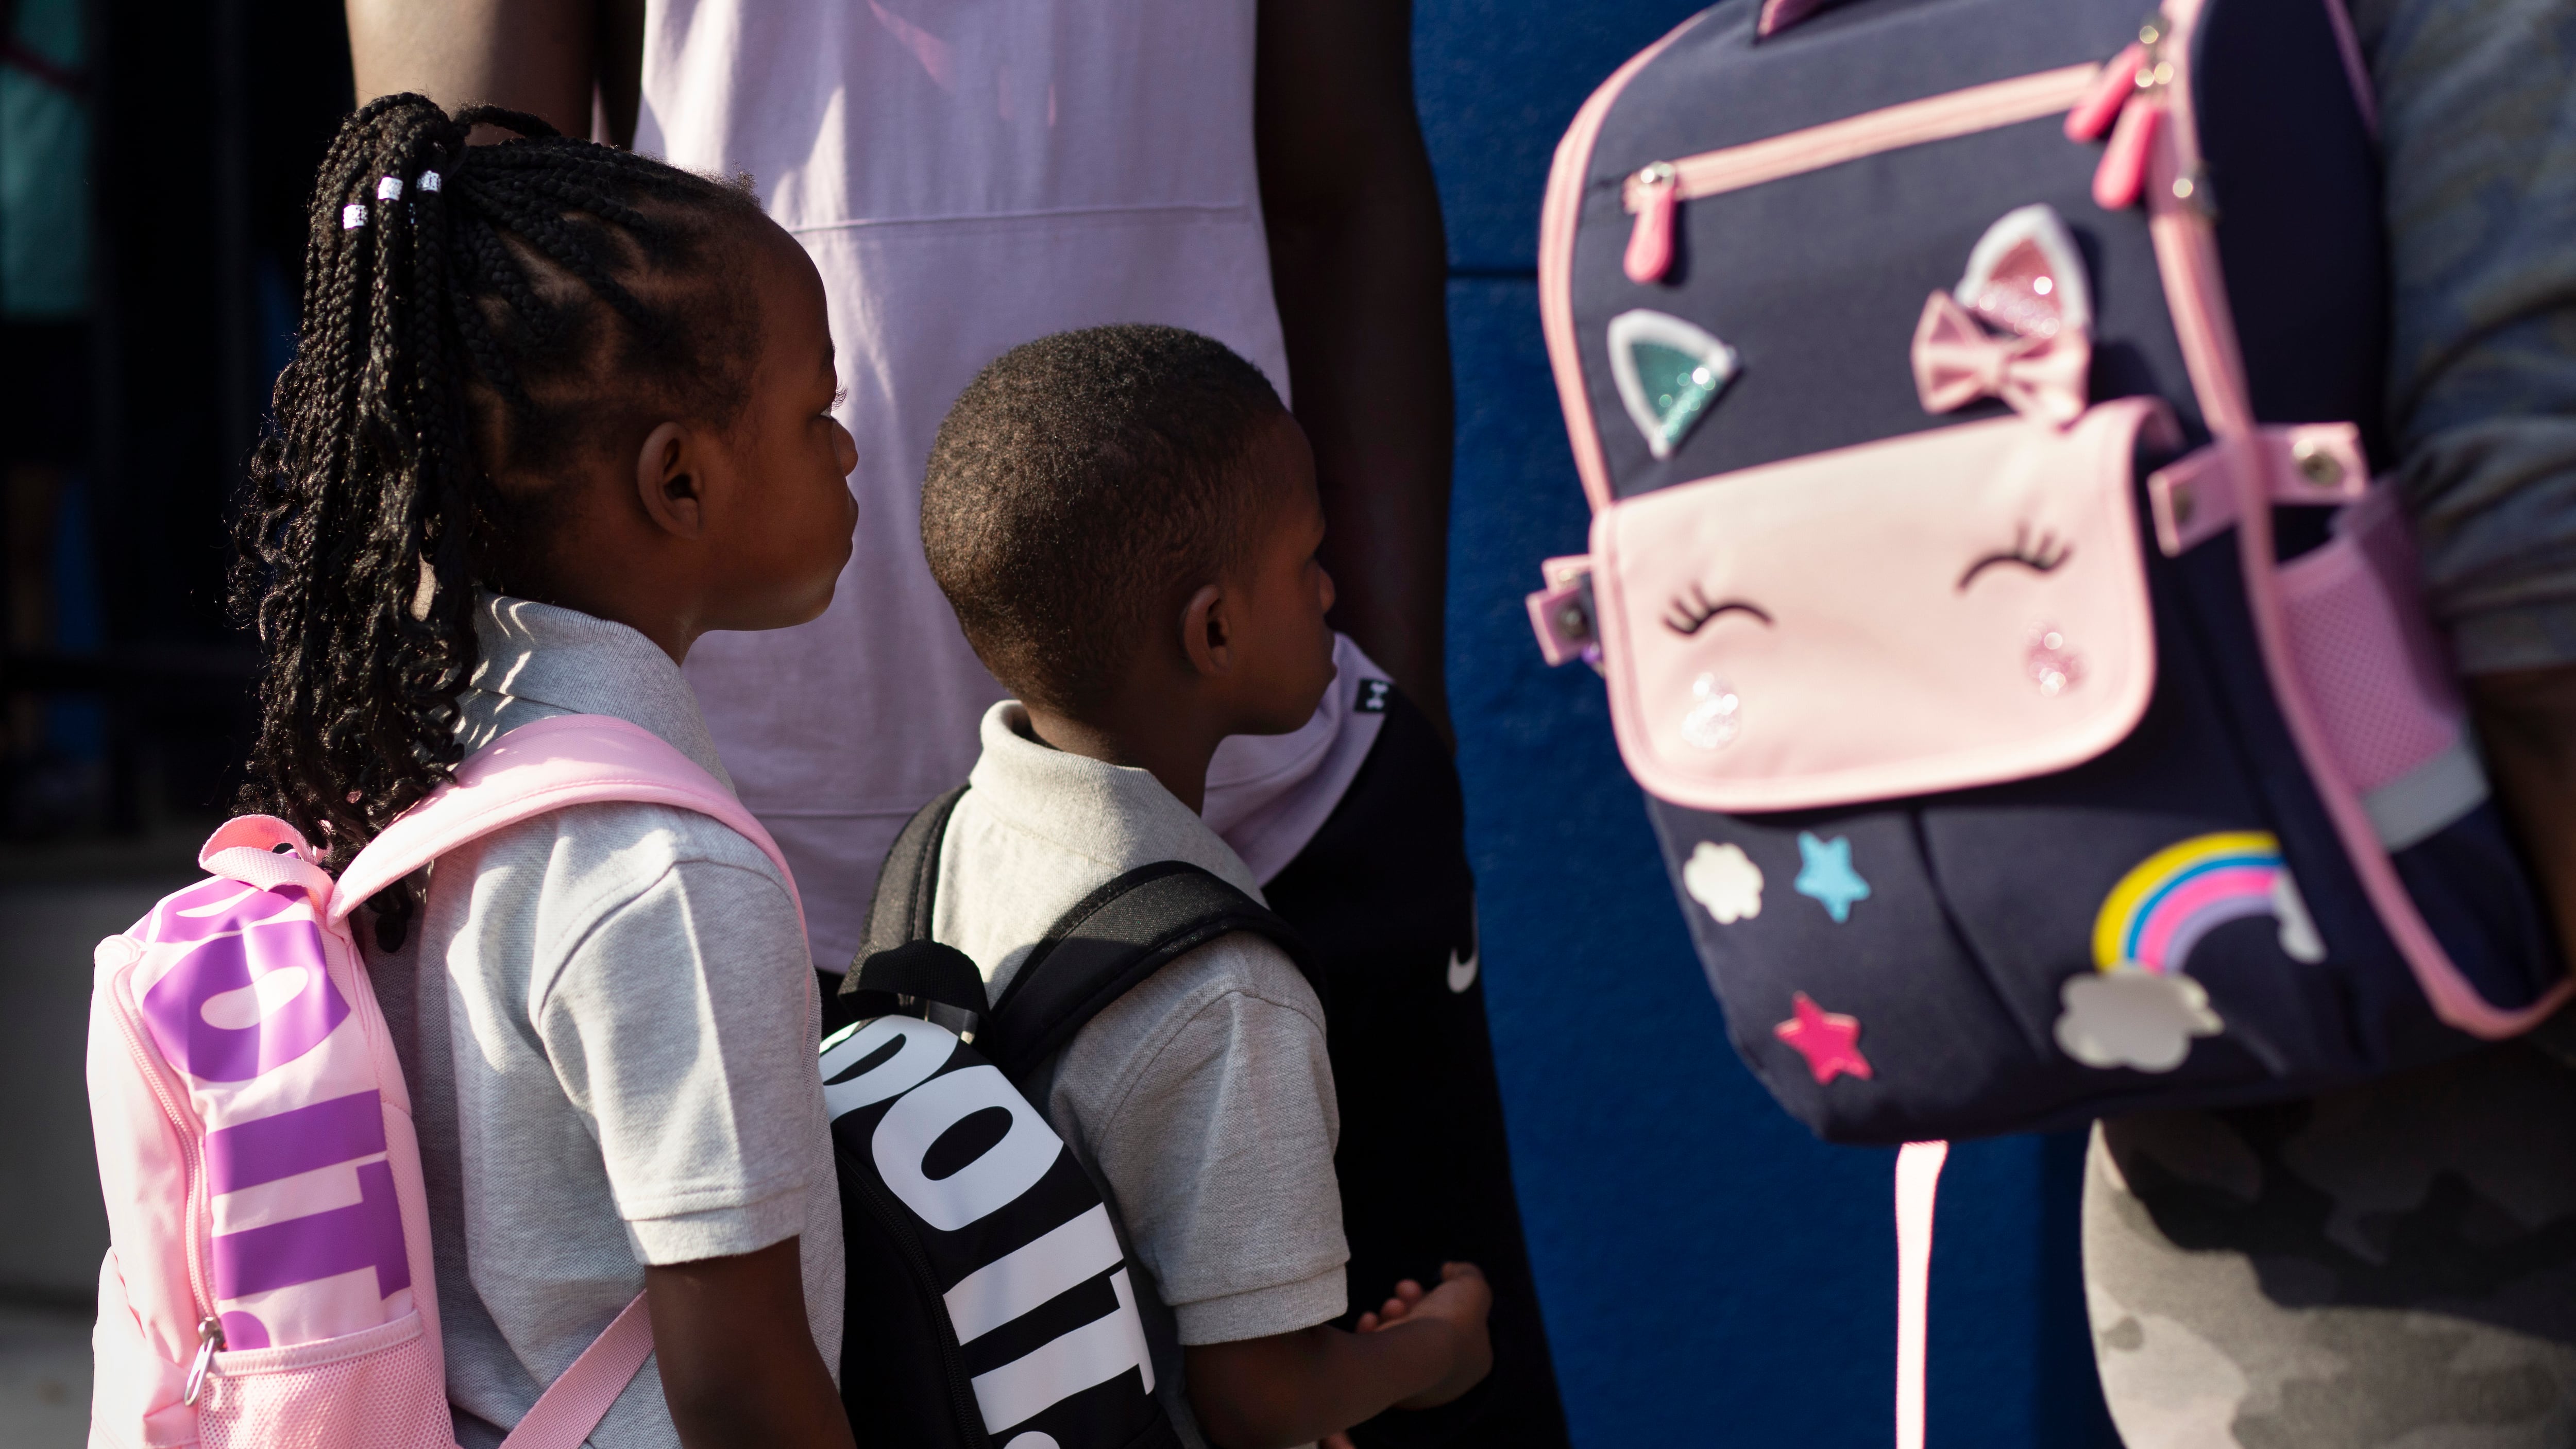 Two students dressed in their best for school and wearing backpacks, stand in line waiting to enter school on the first day.